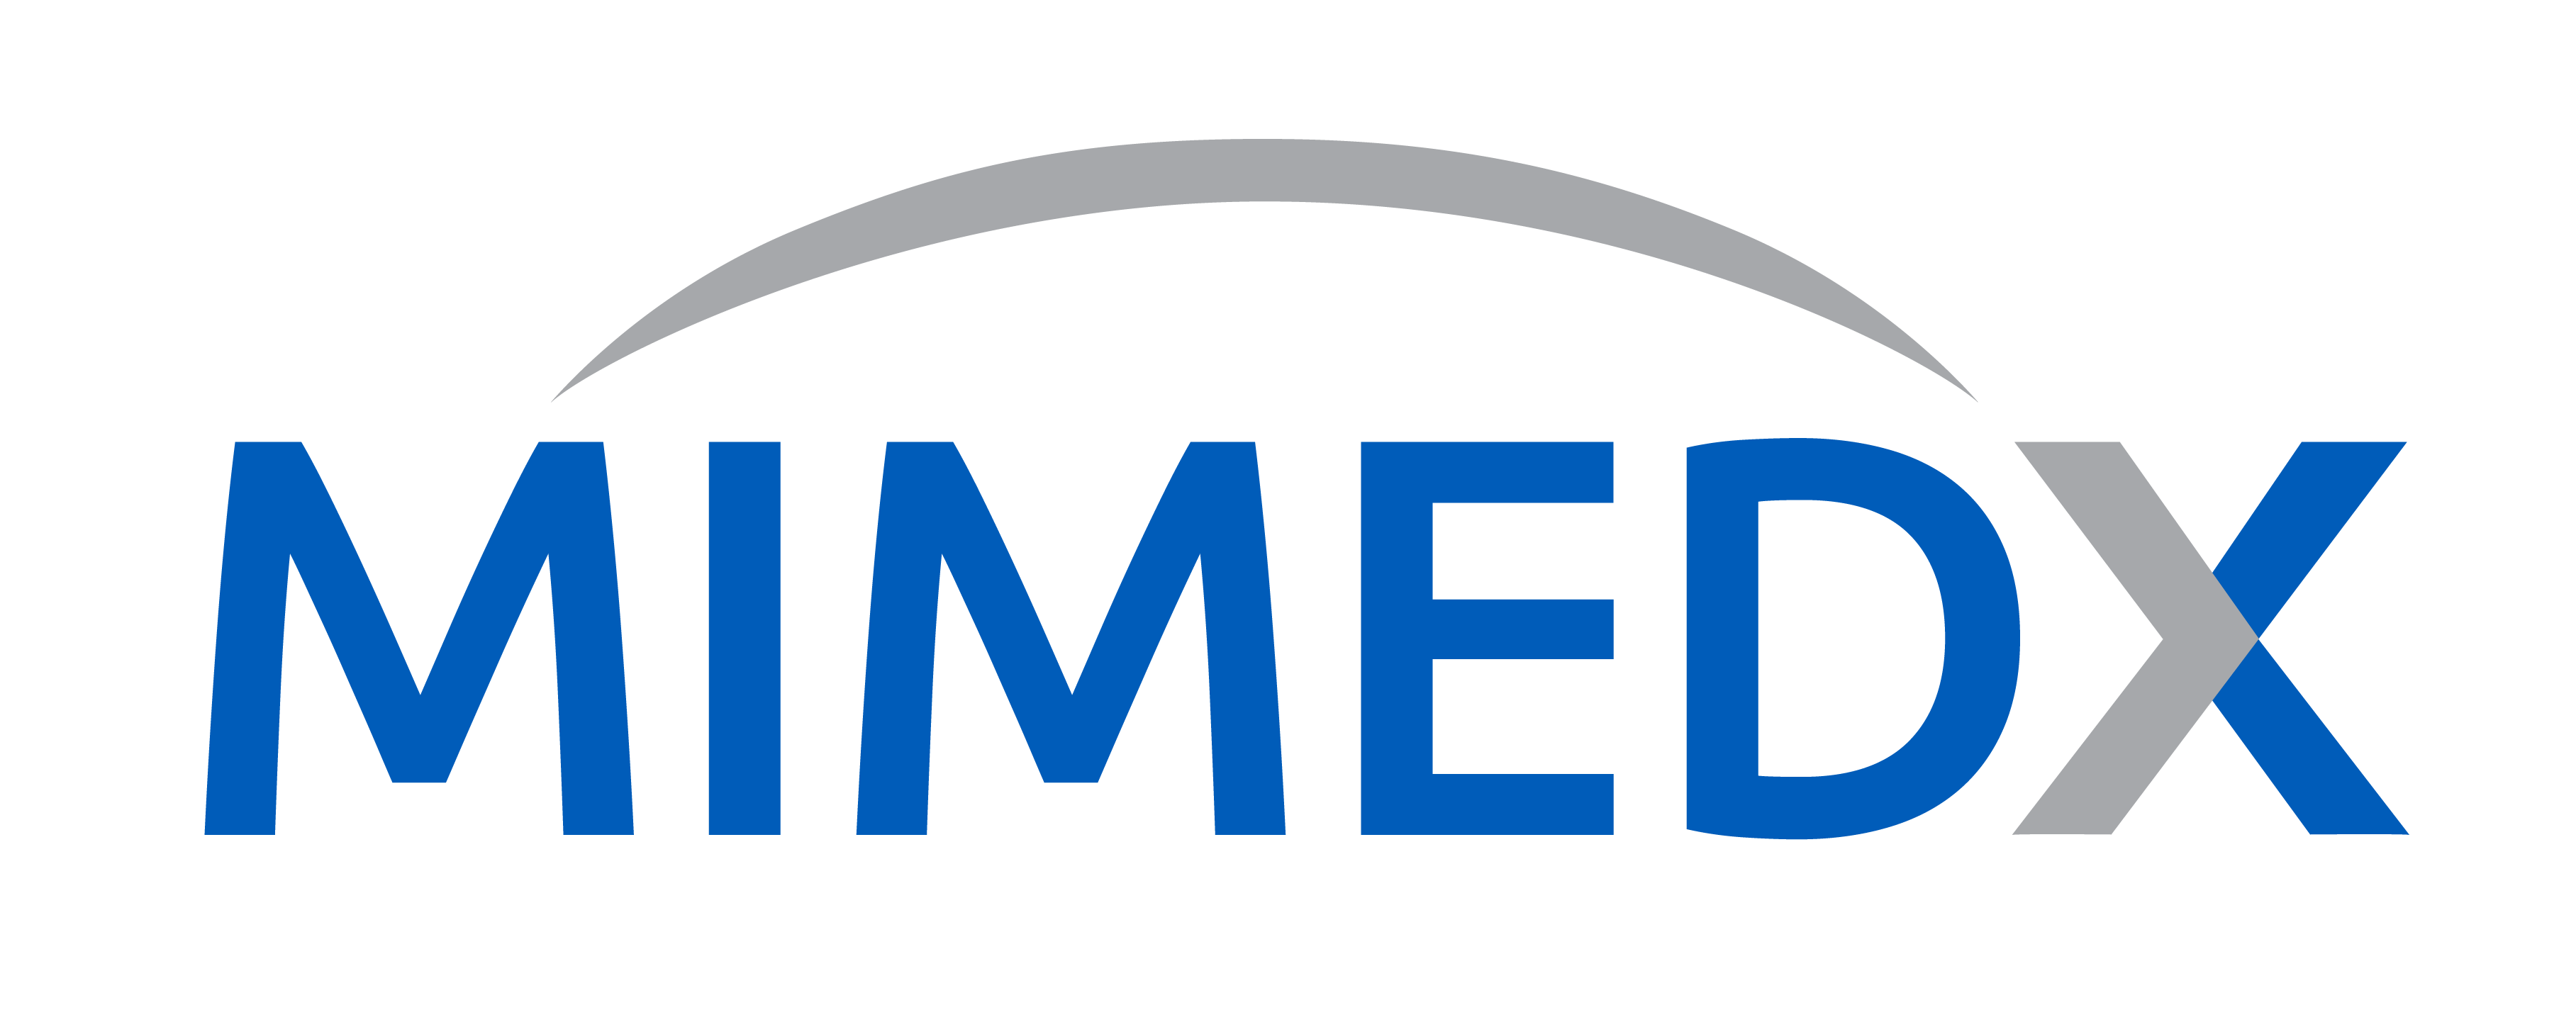 MIMEDX Appoints Matt Notarianni as Head of Investor Relations